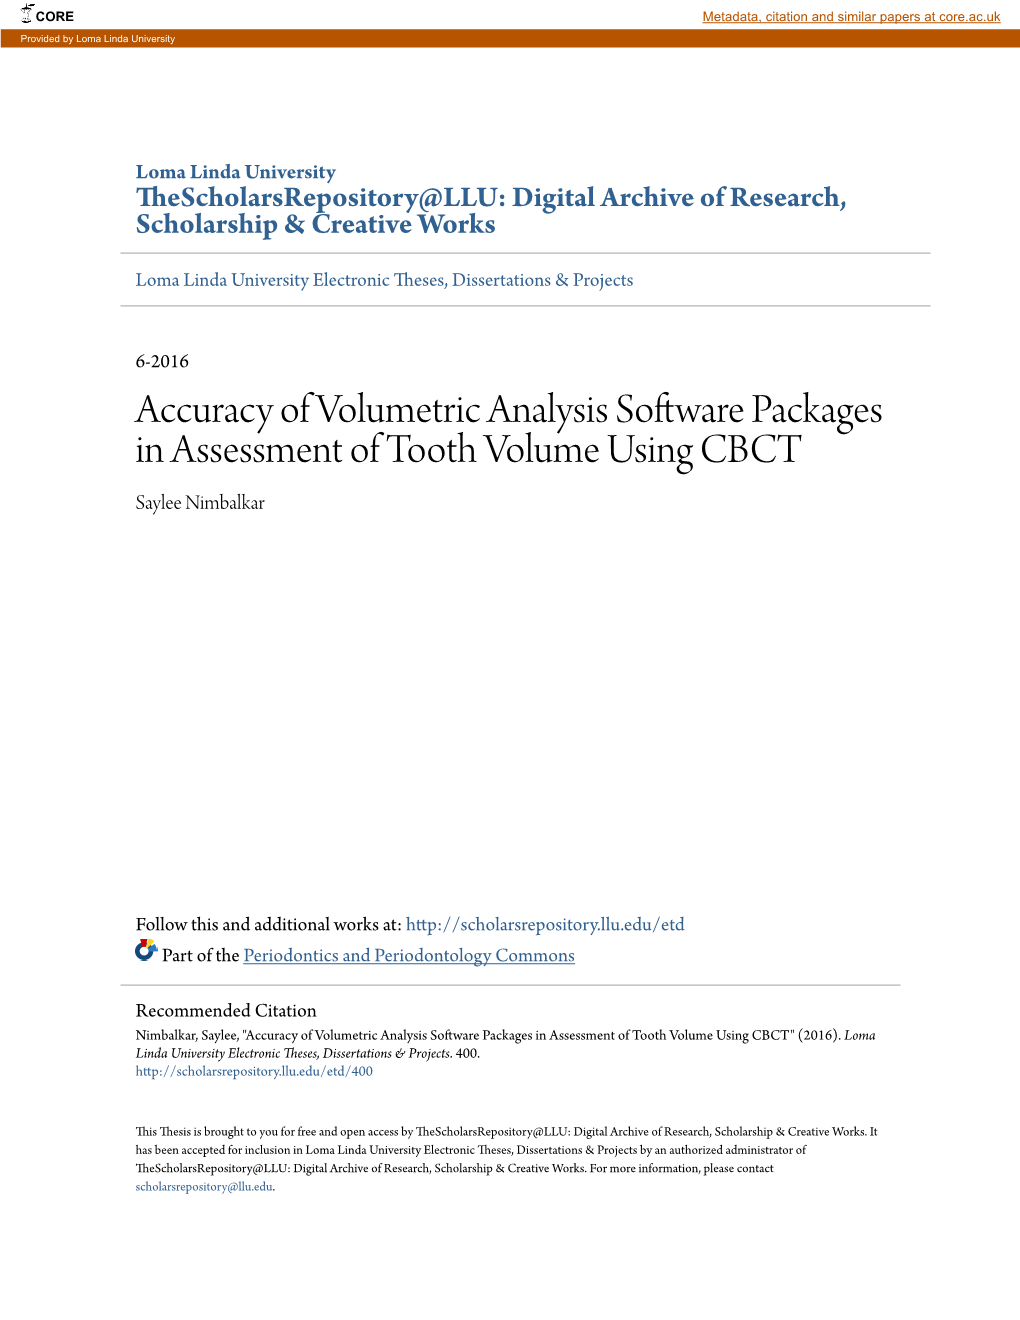 Accuracy of Volumetric Analysis Software Packages in Assessment of Tooth Volume Using CBCT Saylee Nimbalkar